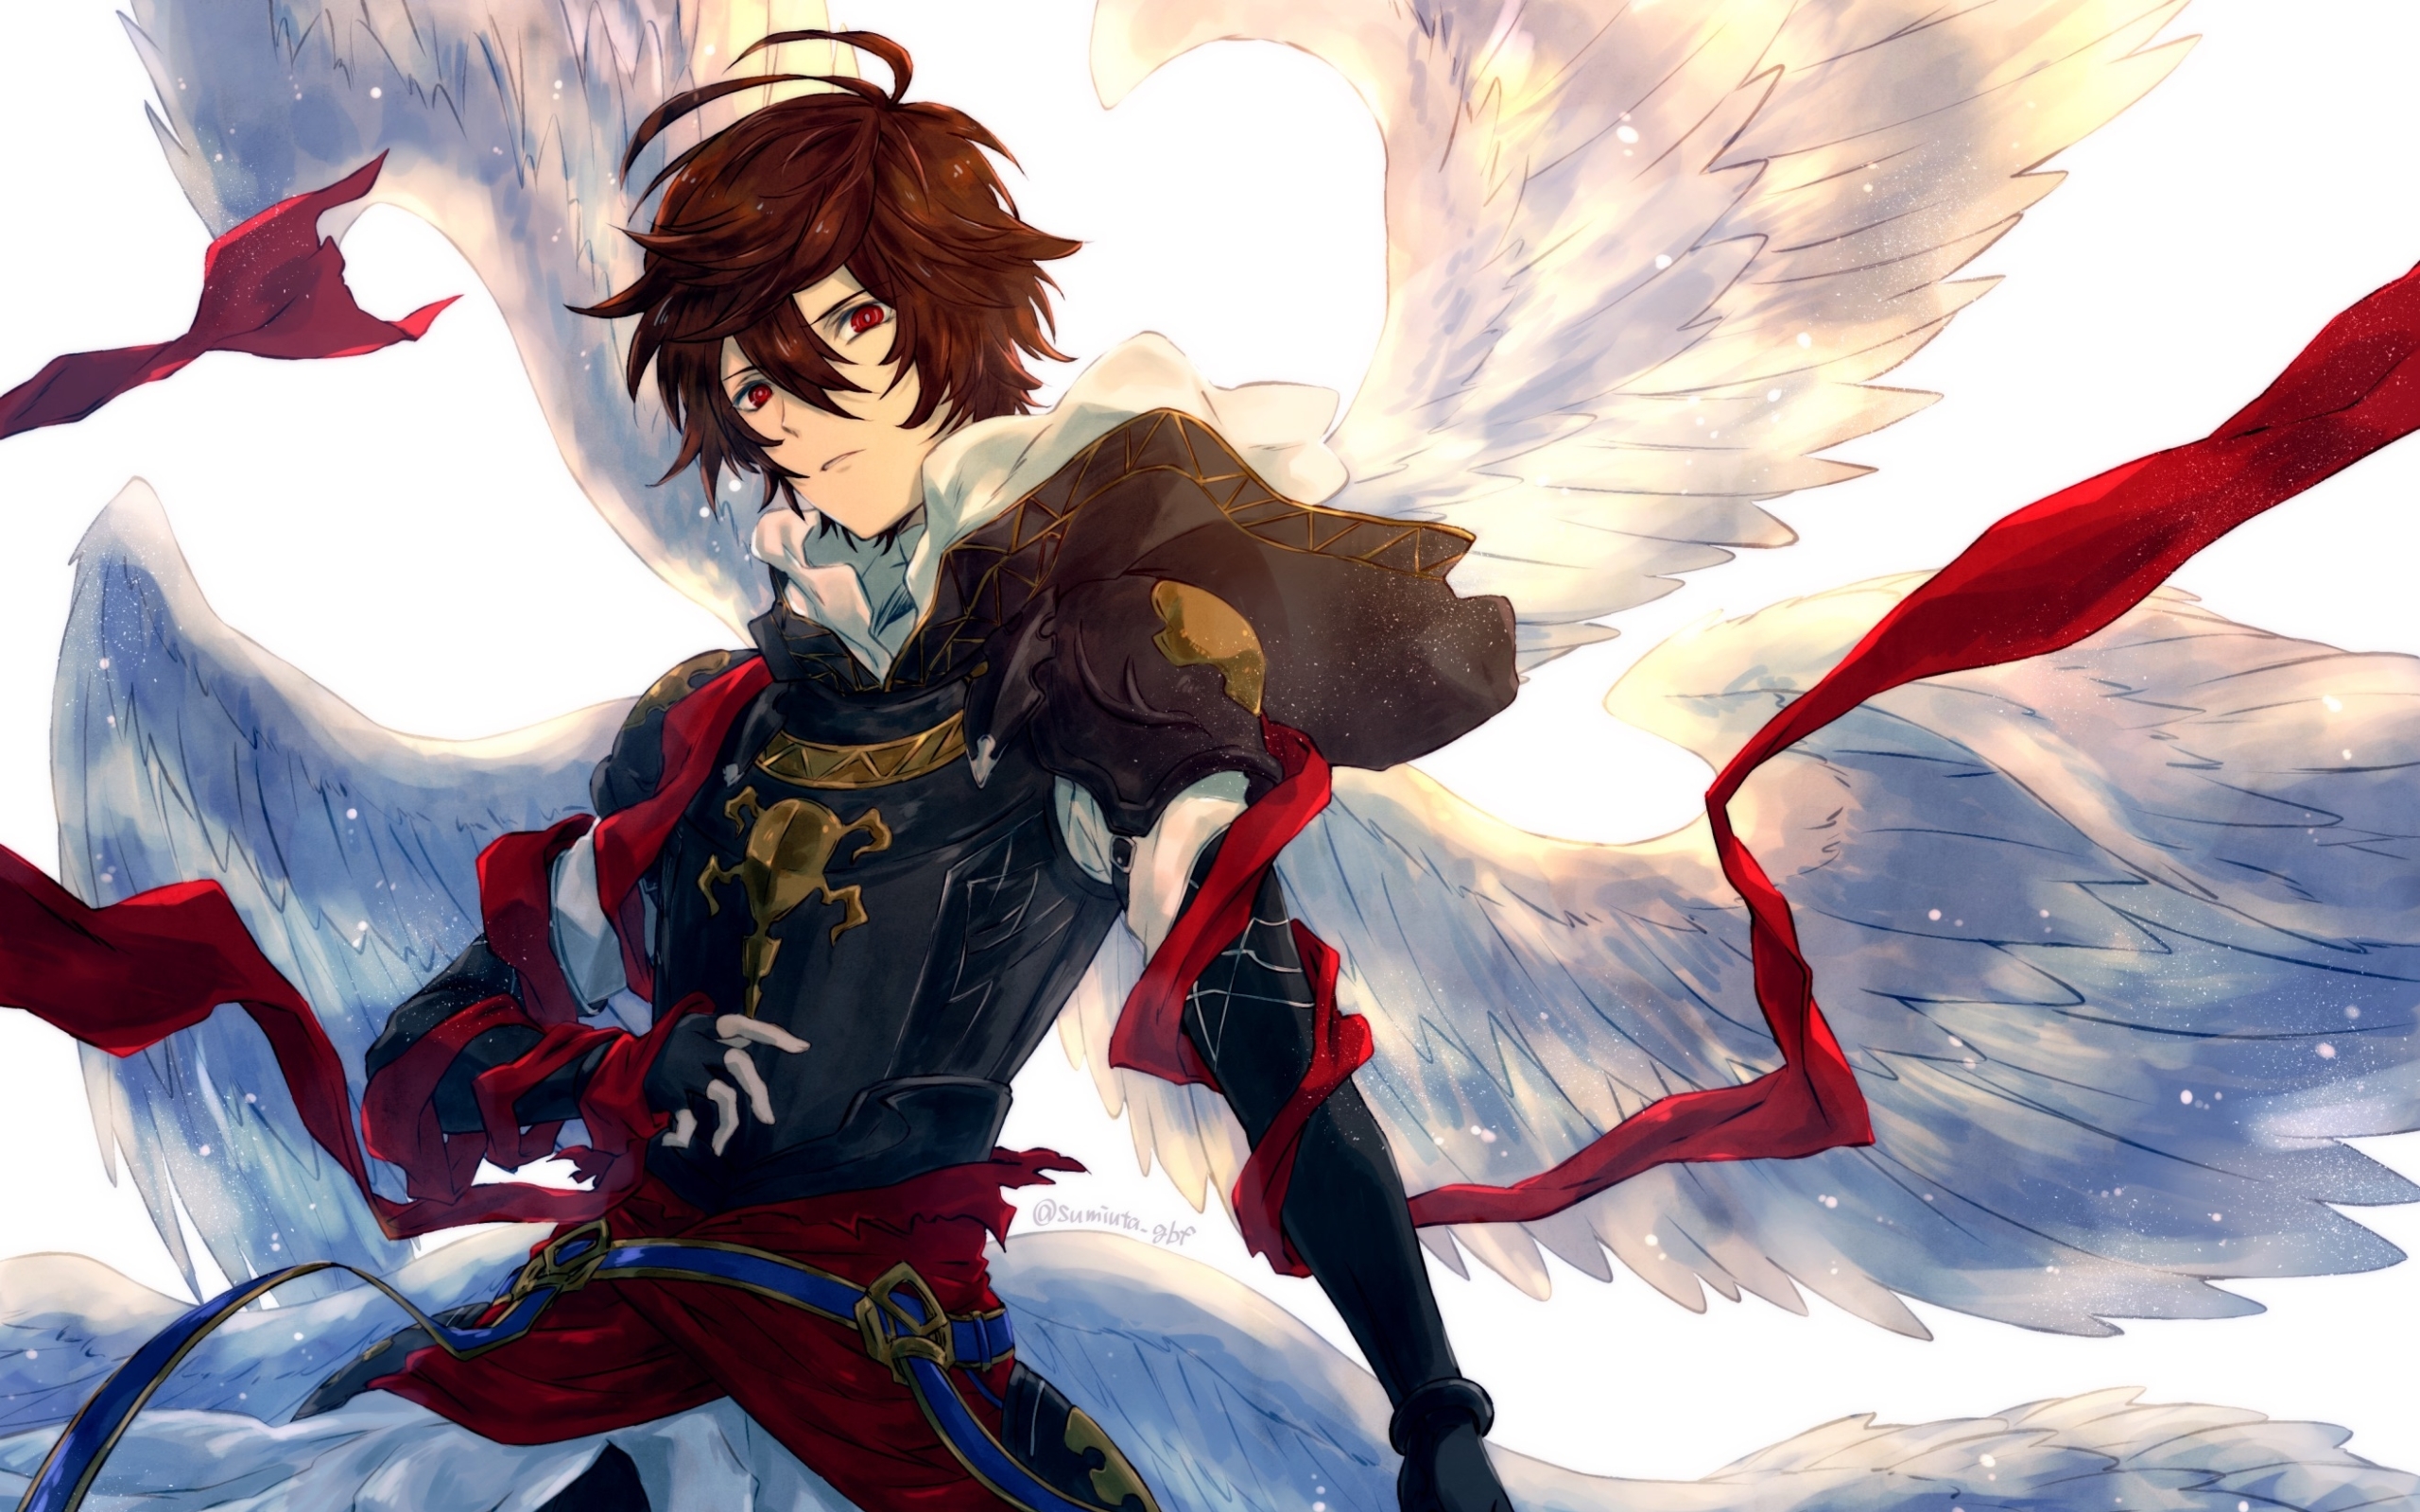 2560x1600 Sandalphon Granblue Fantasy 2560x1600 Resolution Wallpaper Hd Anime 4k Wallpapers Images Photos And Background